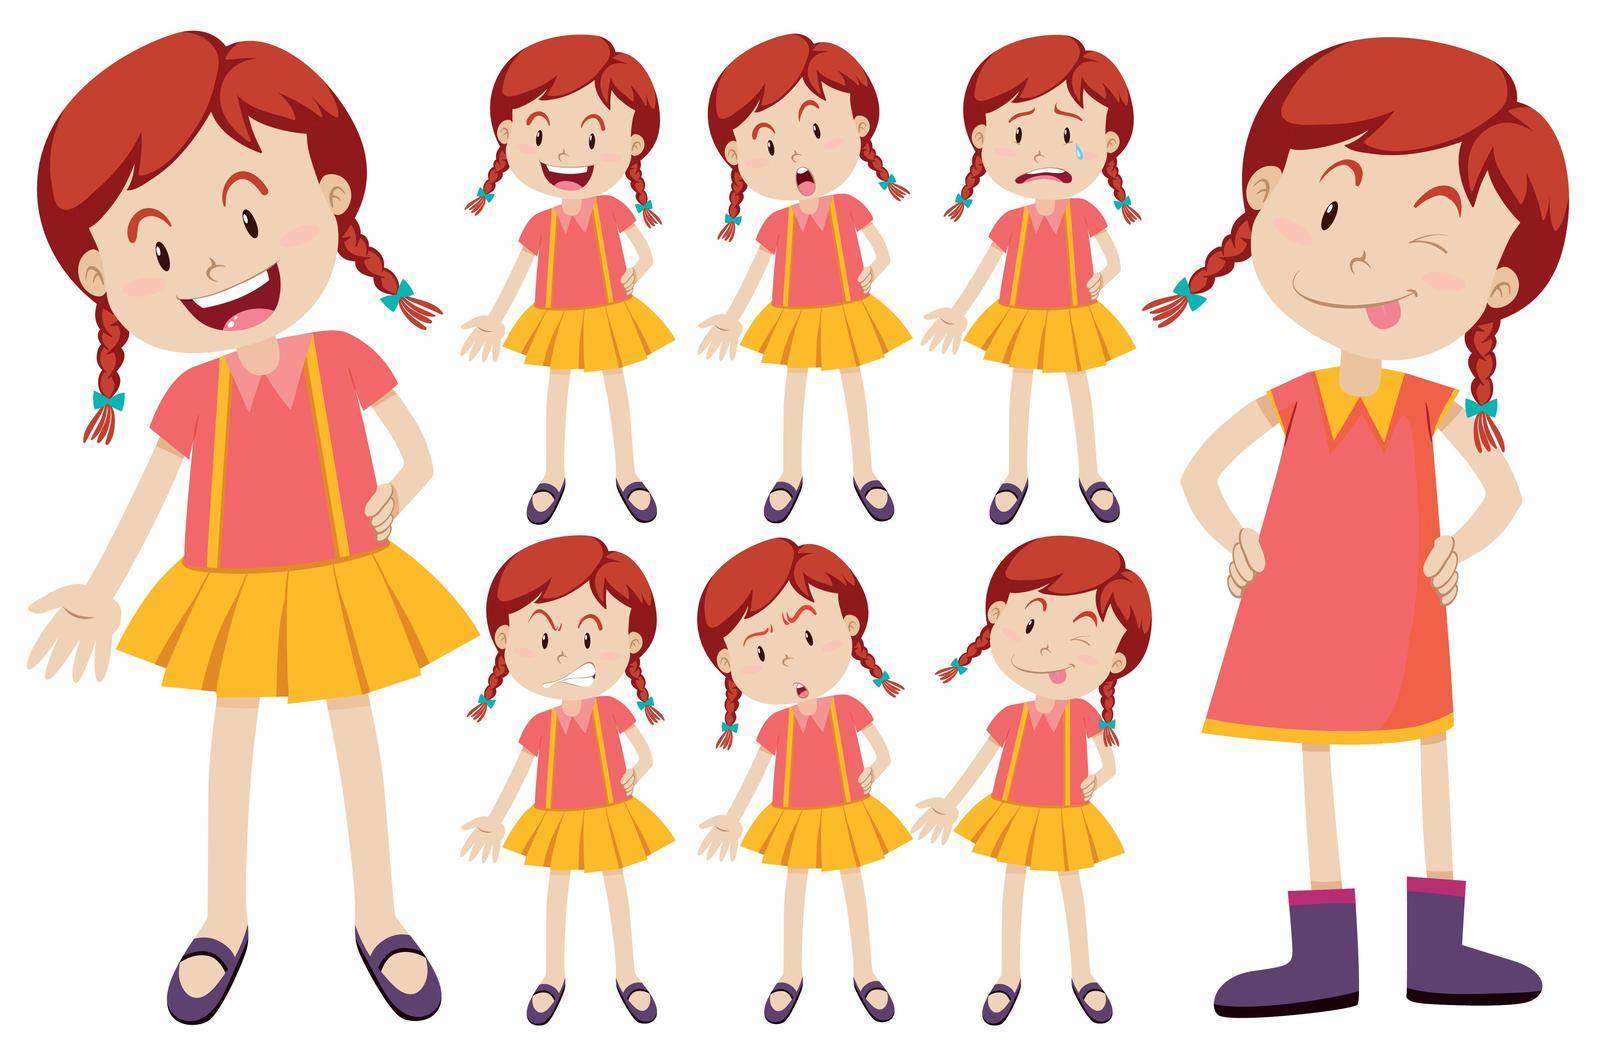 Girl with different facial expressions illustration